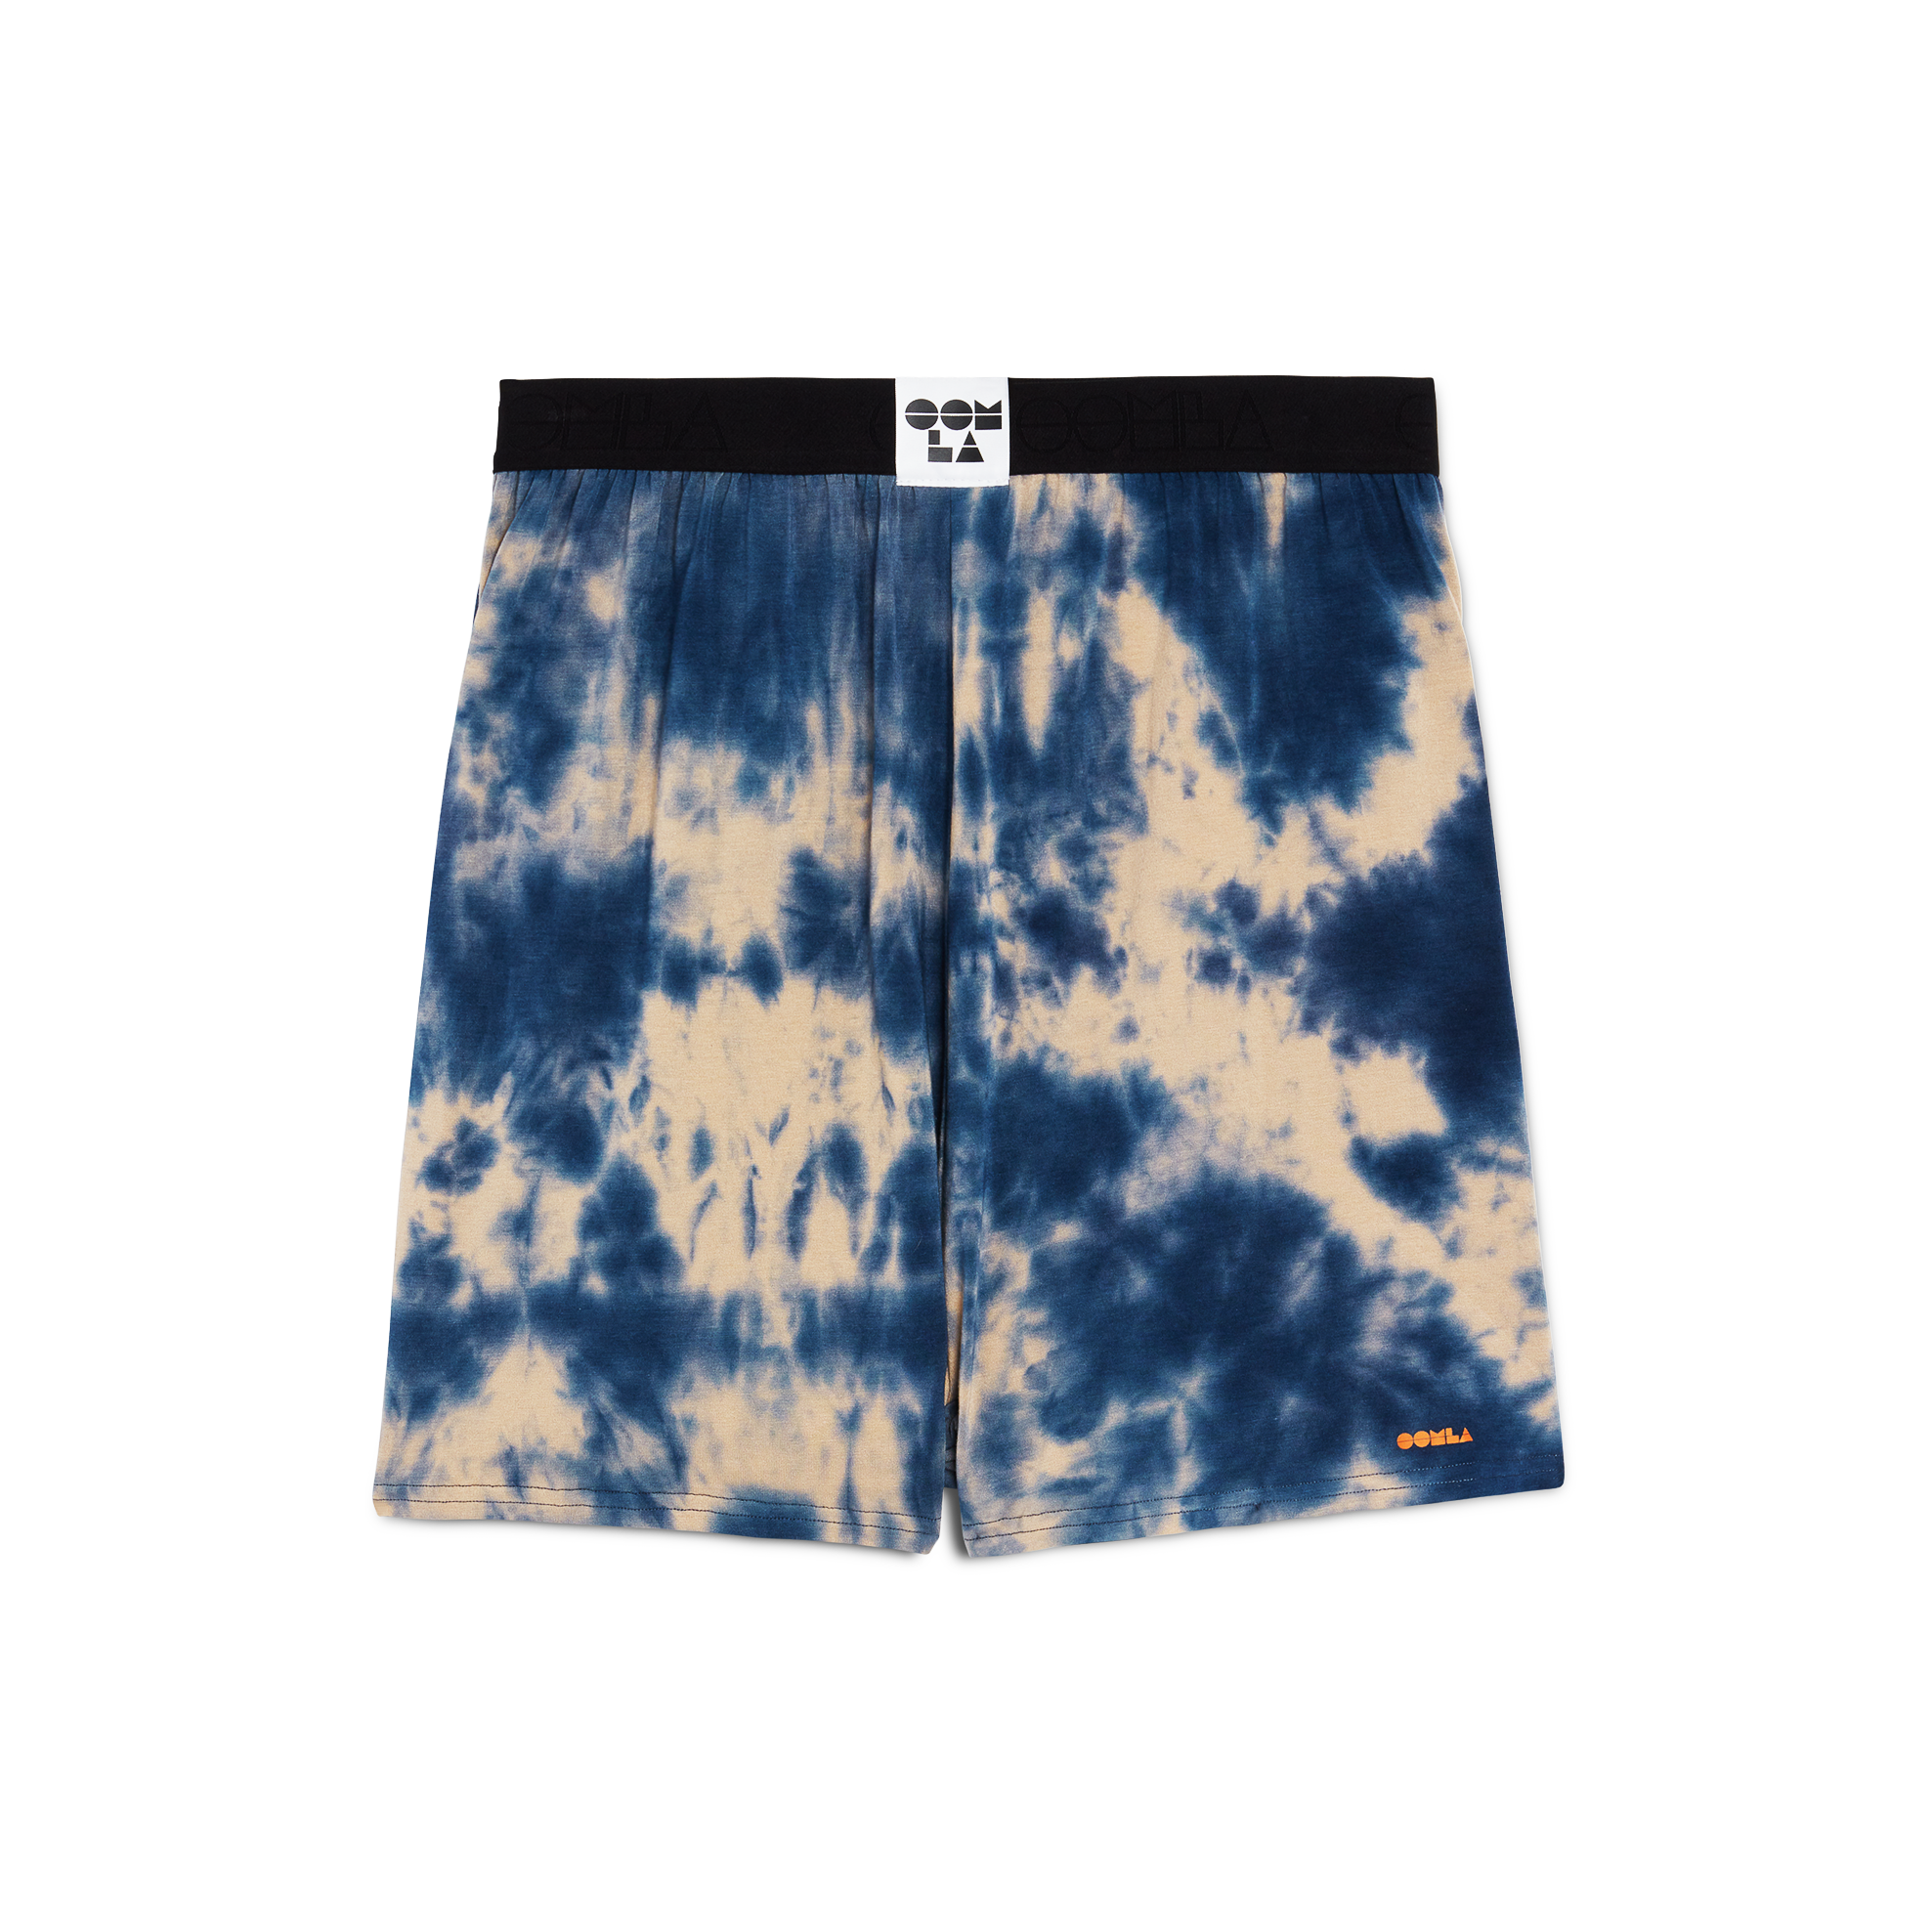 *Limited Edition* Blue Crystal Dye + Tan OOMSHORTS